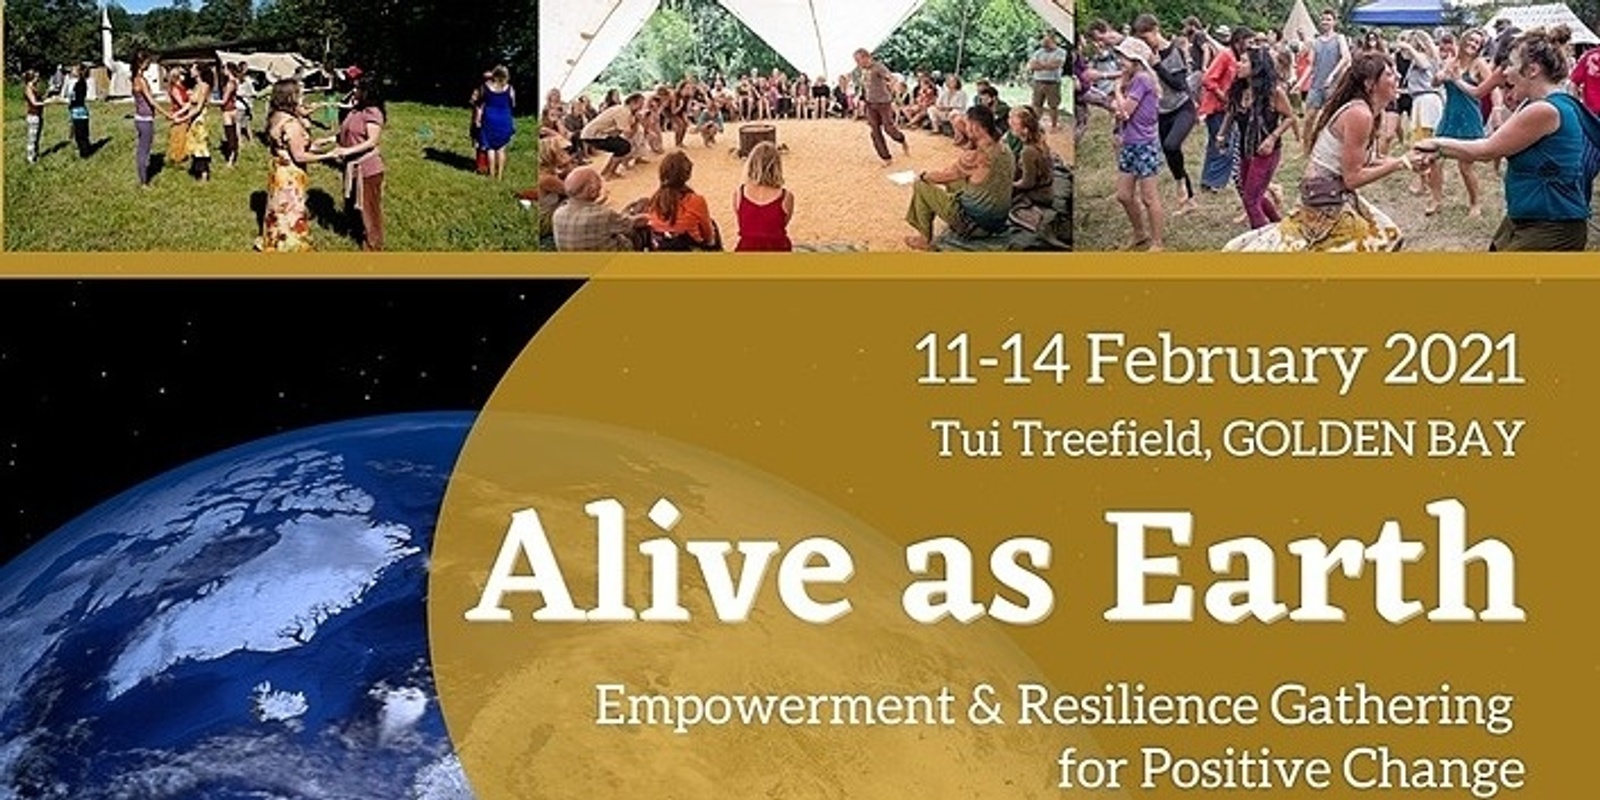 Banner image for Alive as Earth - Empowerment & Resilience Gathering for Positive Change